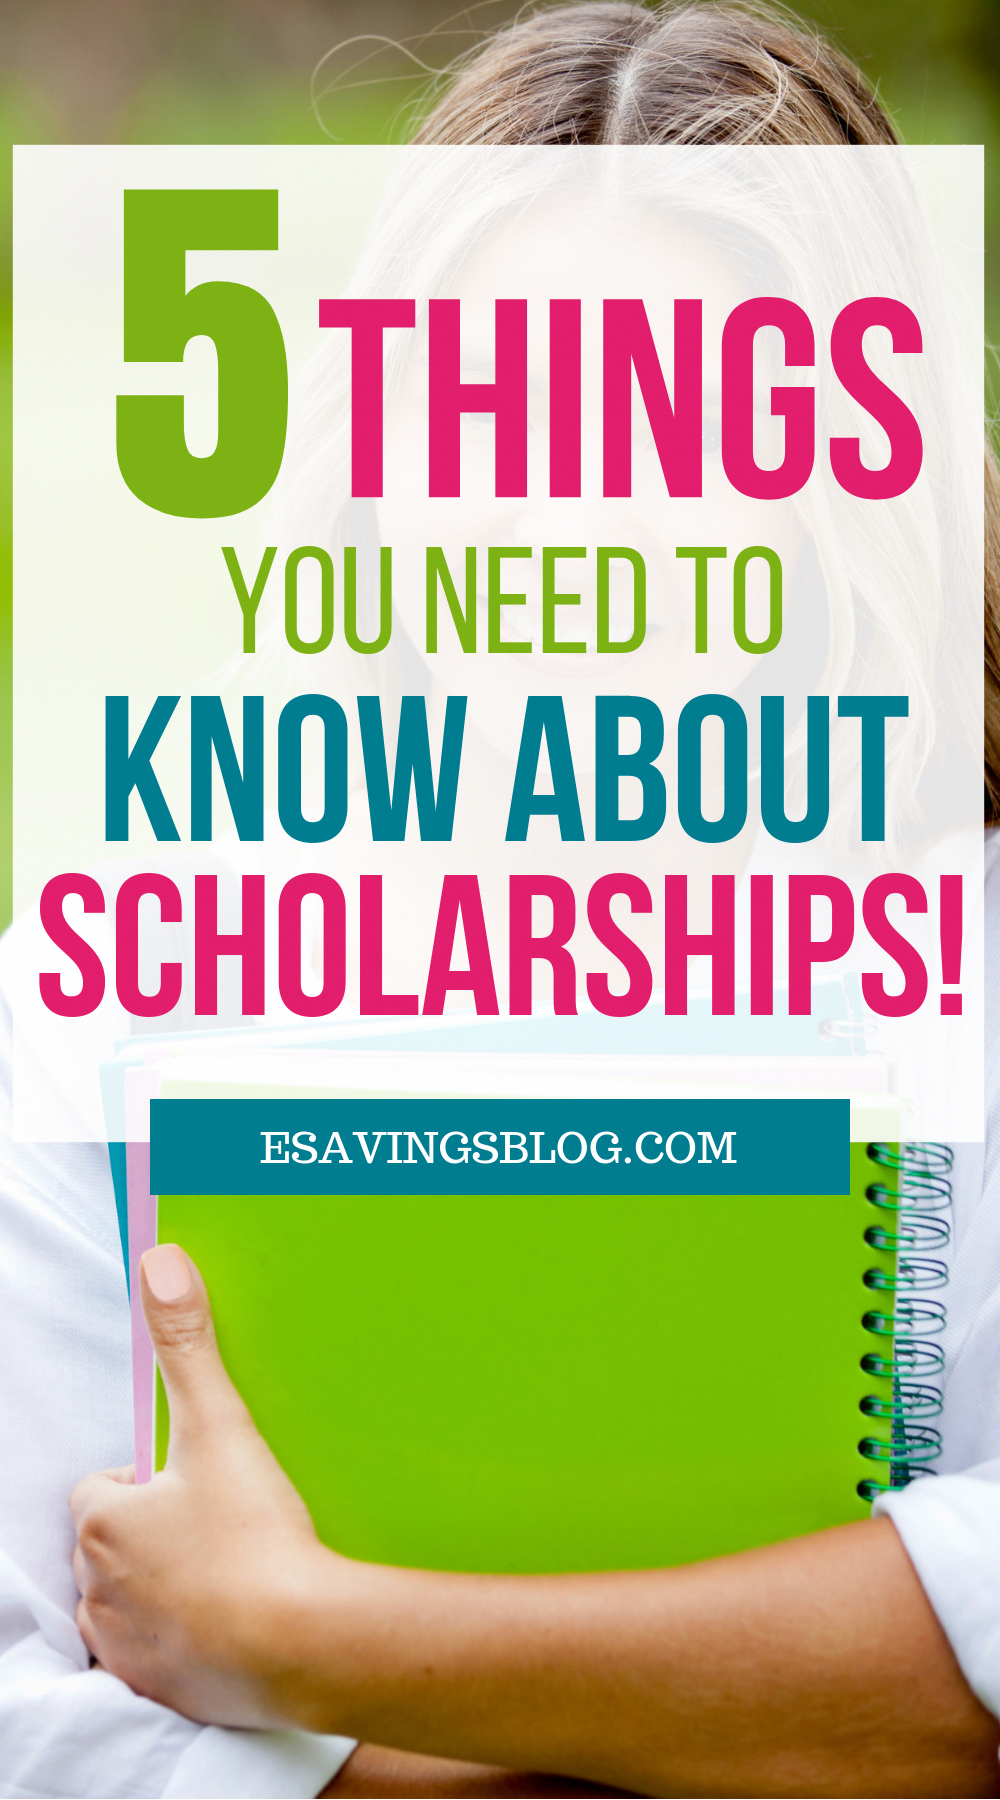 How Do Scholarships Work? 5 Things You Need to Know!